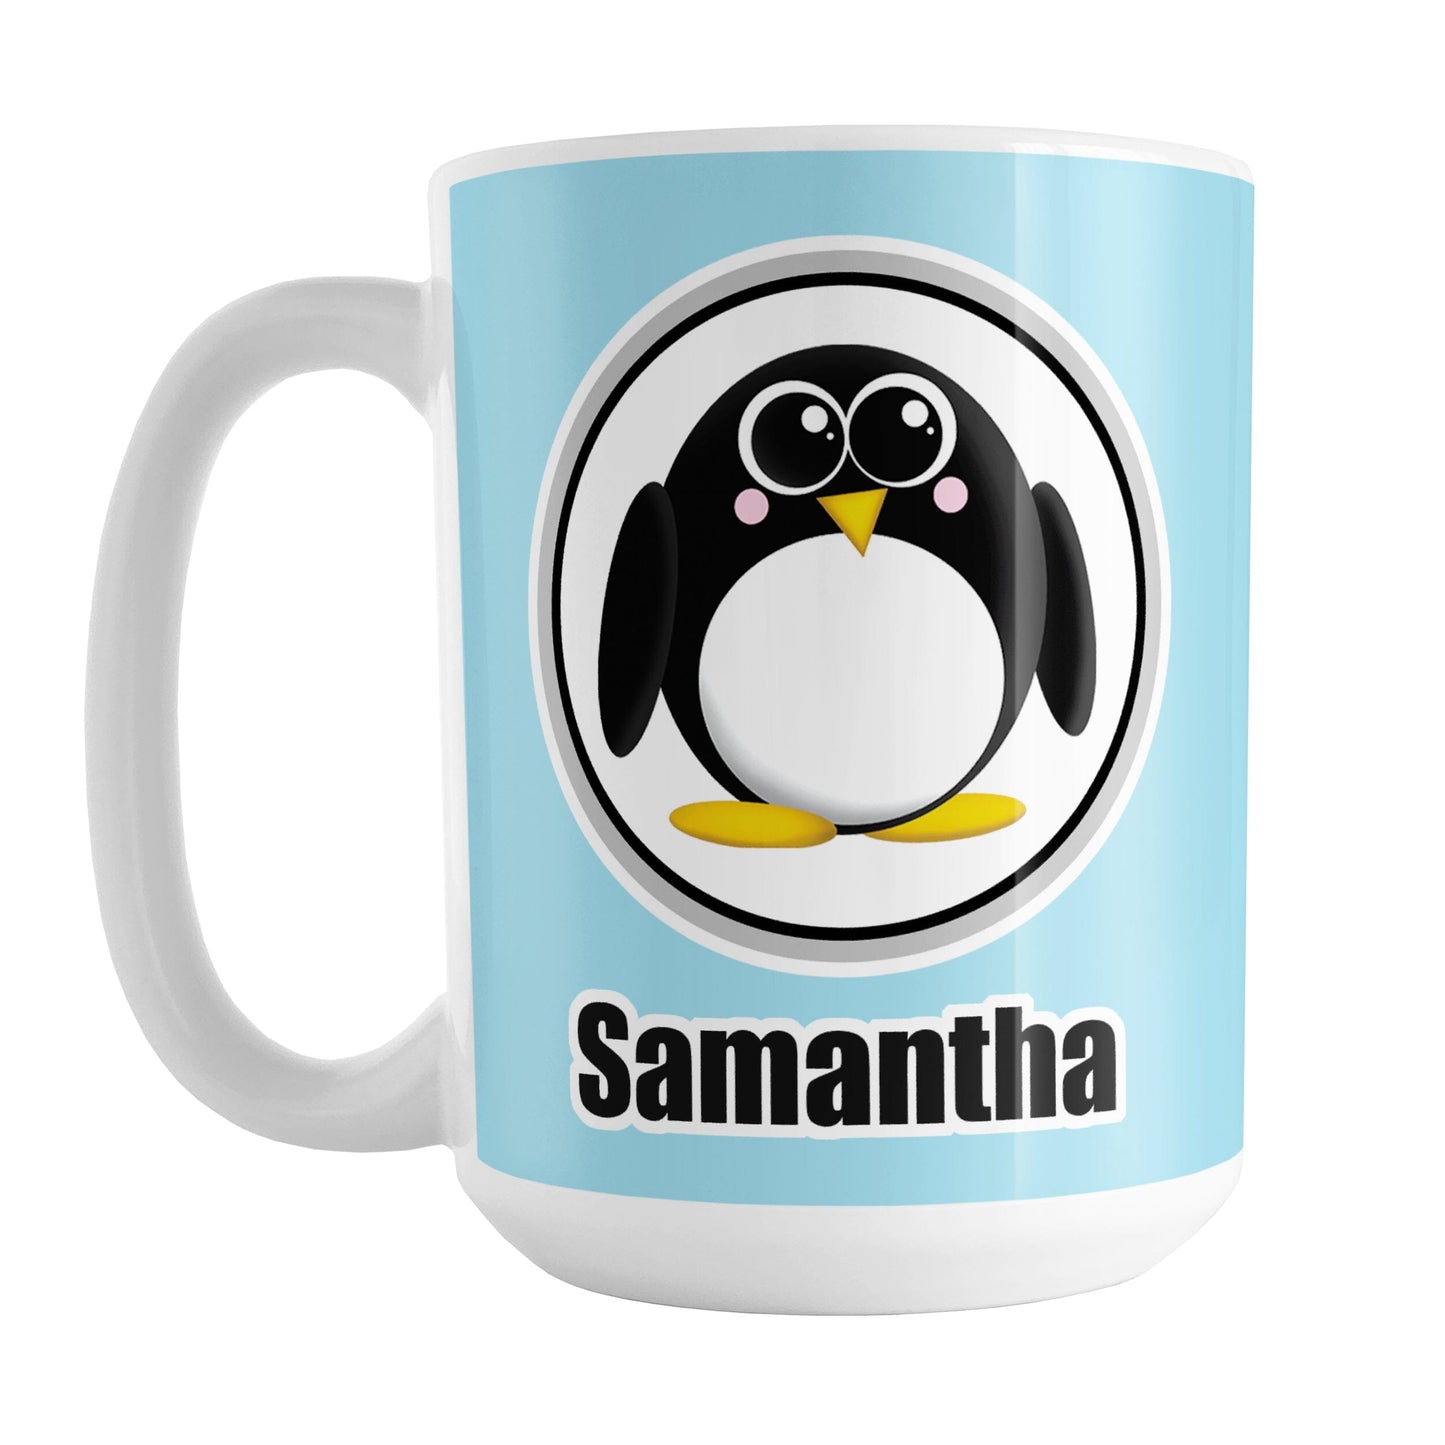 Personalized Adorable Light Blue Penguin Mug (15oz) at Amy's Coffee Mugs. A ceramic coffee mug designed with an adorable rounded penguin in a white circle over a light blue background that wraps around the mug to the handle. Your name is personalized in black below the penguin, on both sides of the mug. 